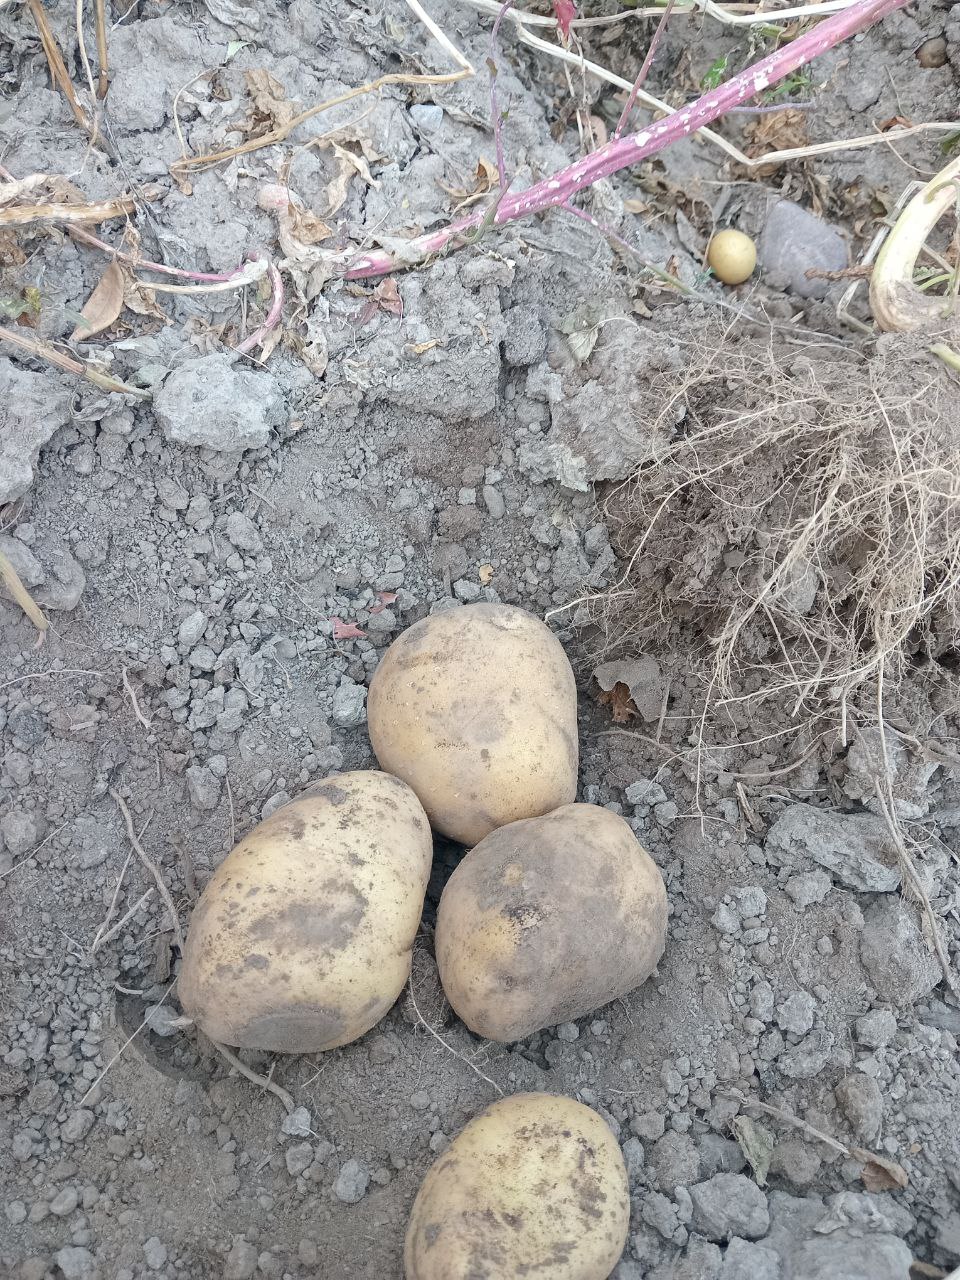 four uncovered potatoes on top of the soil they had been growing in